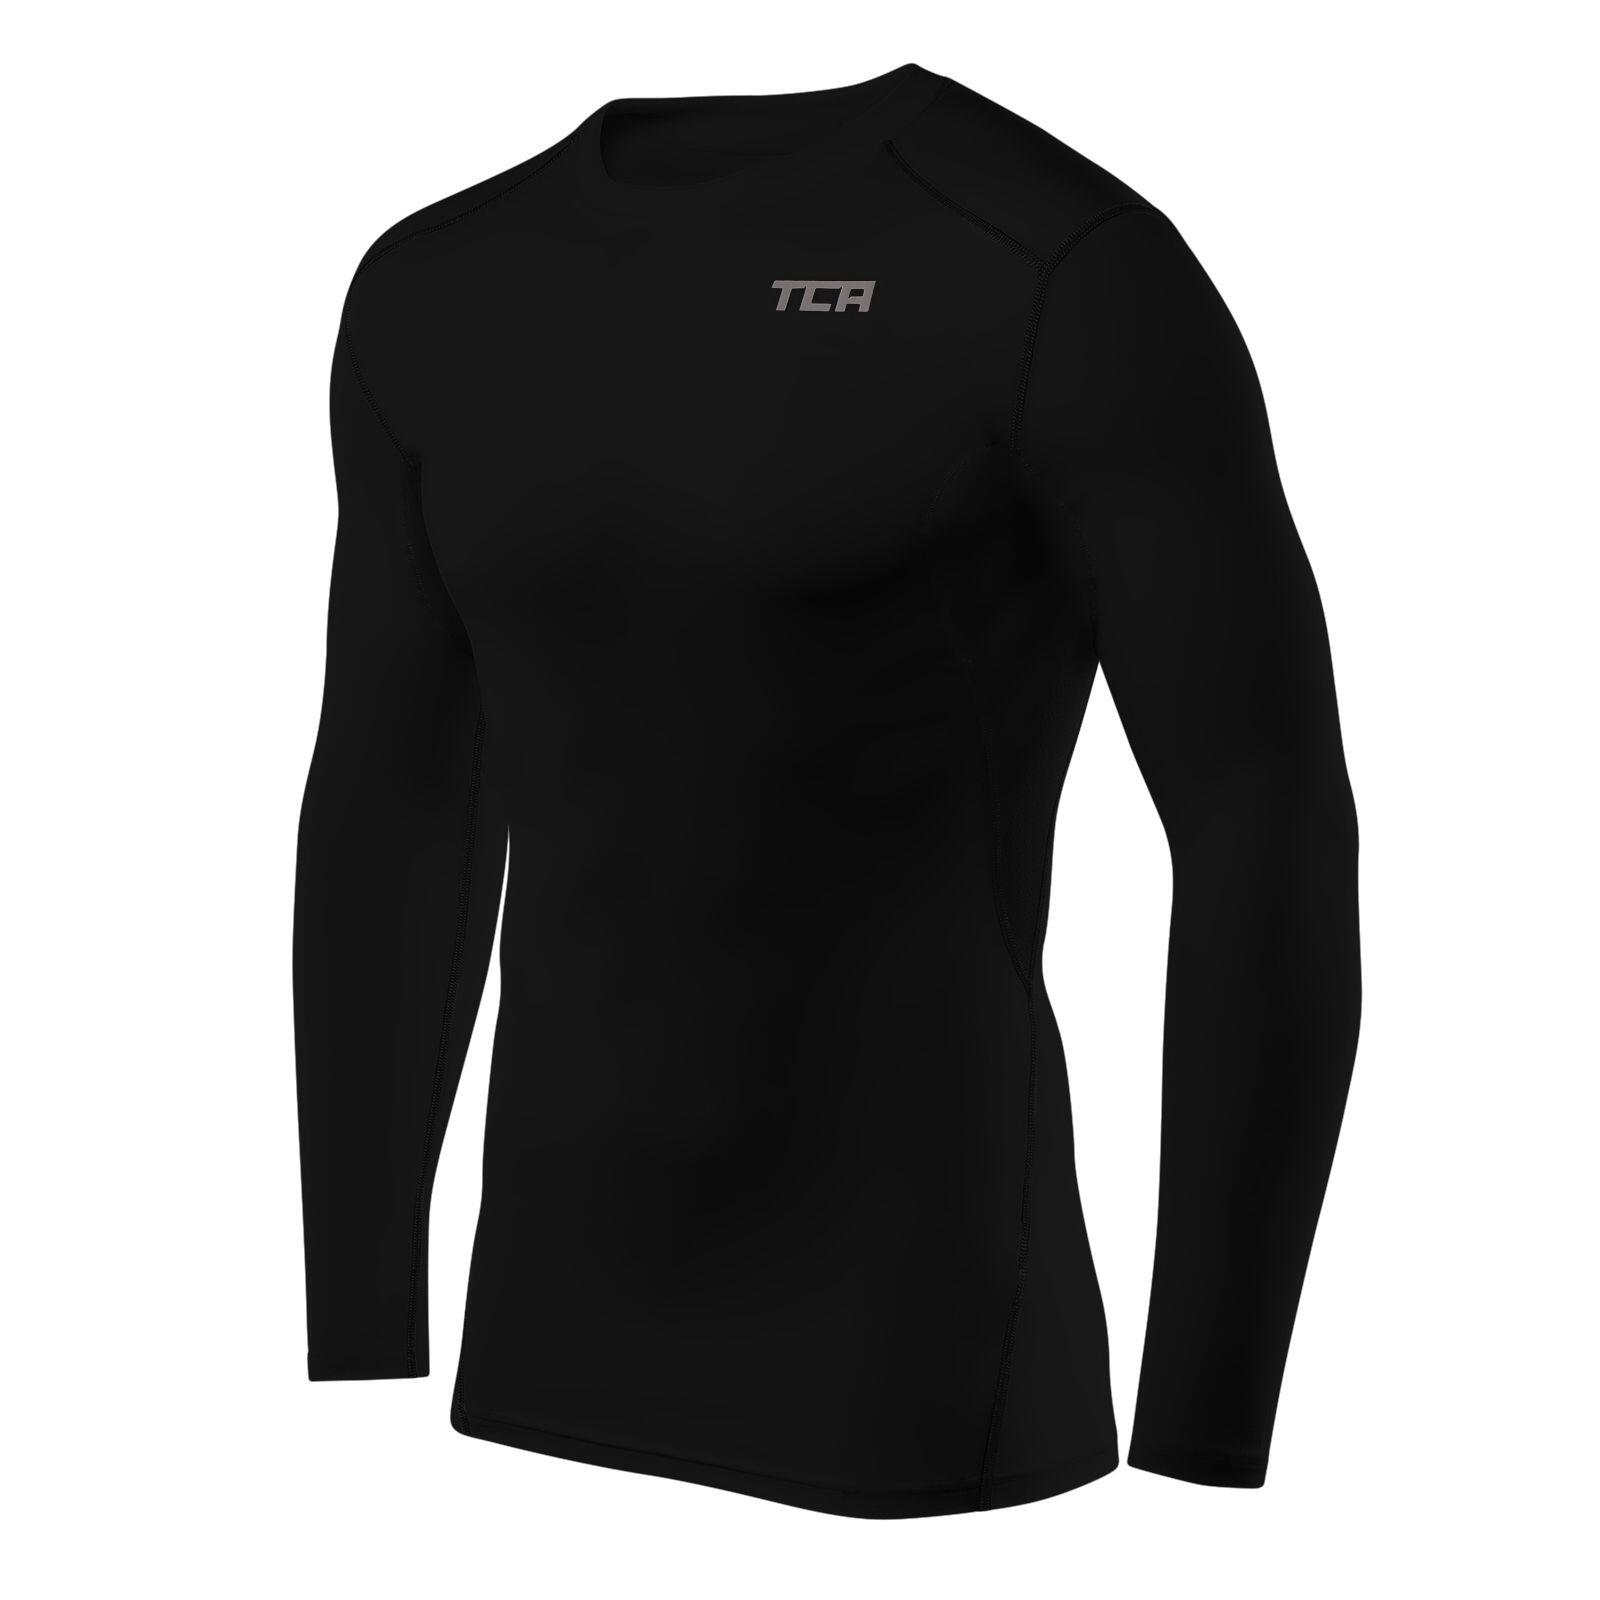 Men's HyperFusion Breathable Base Layer Compression Top - Black 2/5